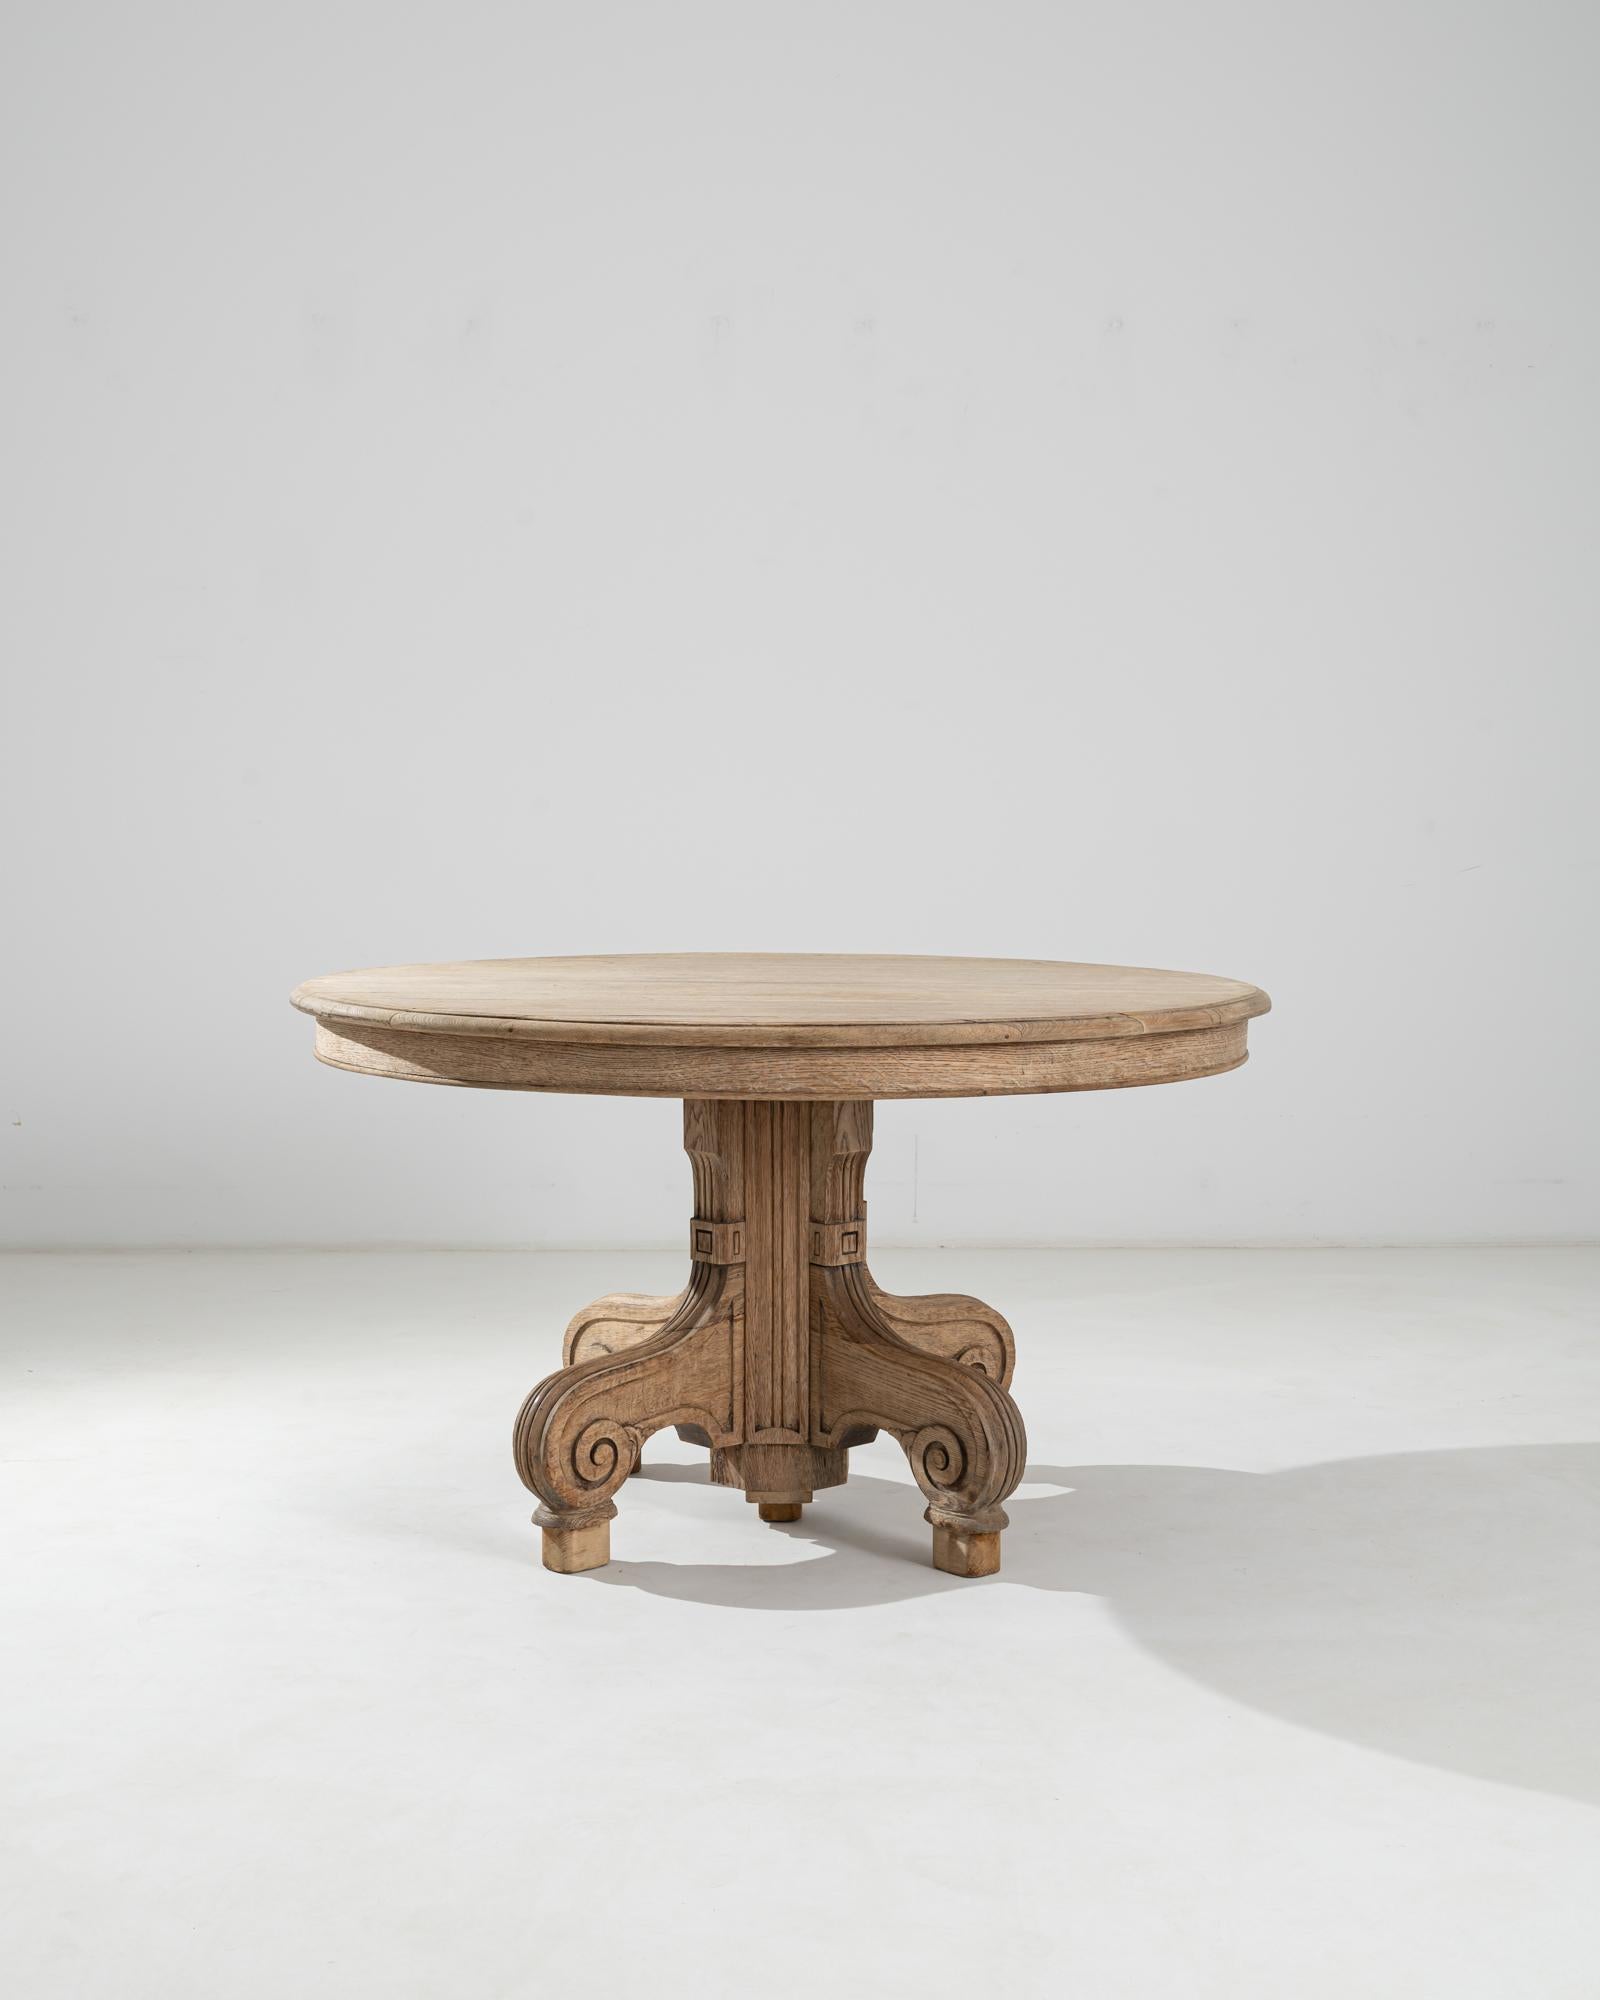 This French antique table boasts a flawlessly round table top raised on an ornate base with four volute-legs carved out of solid oak. A natural pale tone of the bleached wood dramatizes the flowing effect created by the meticulous carvings